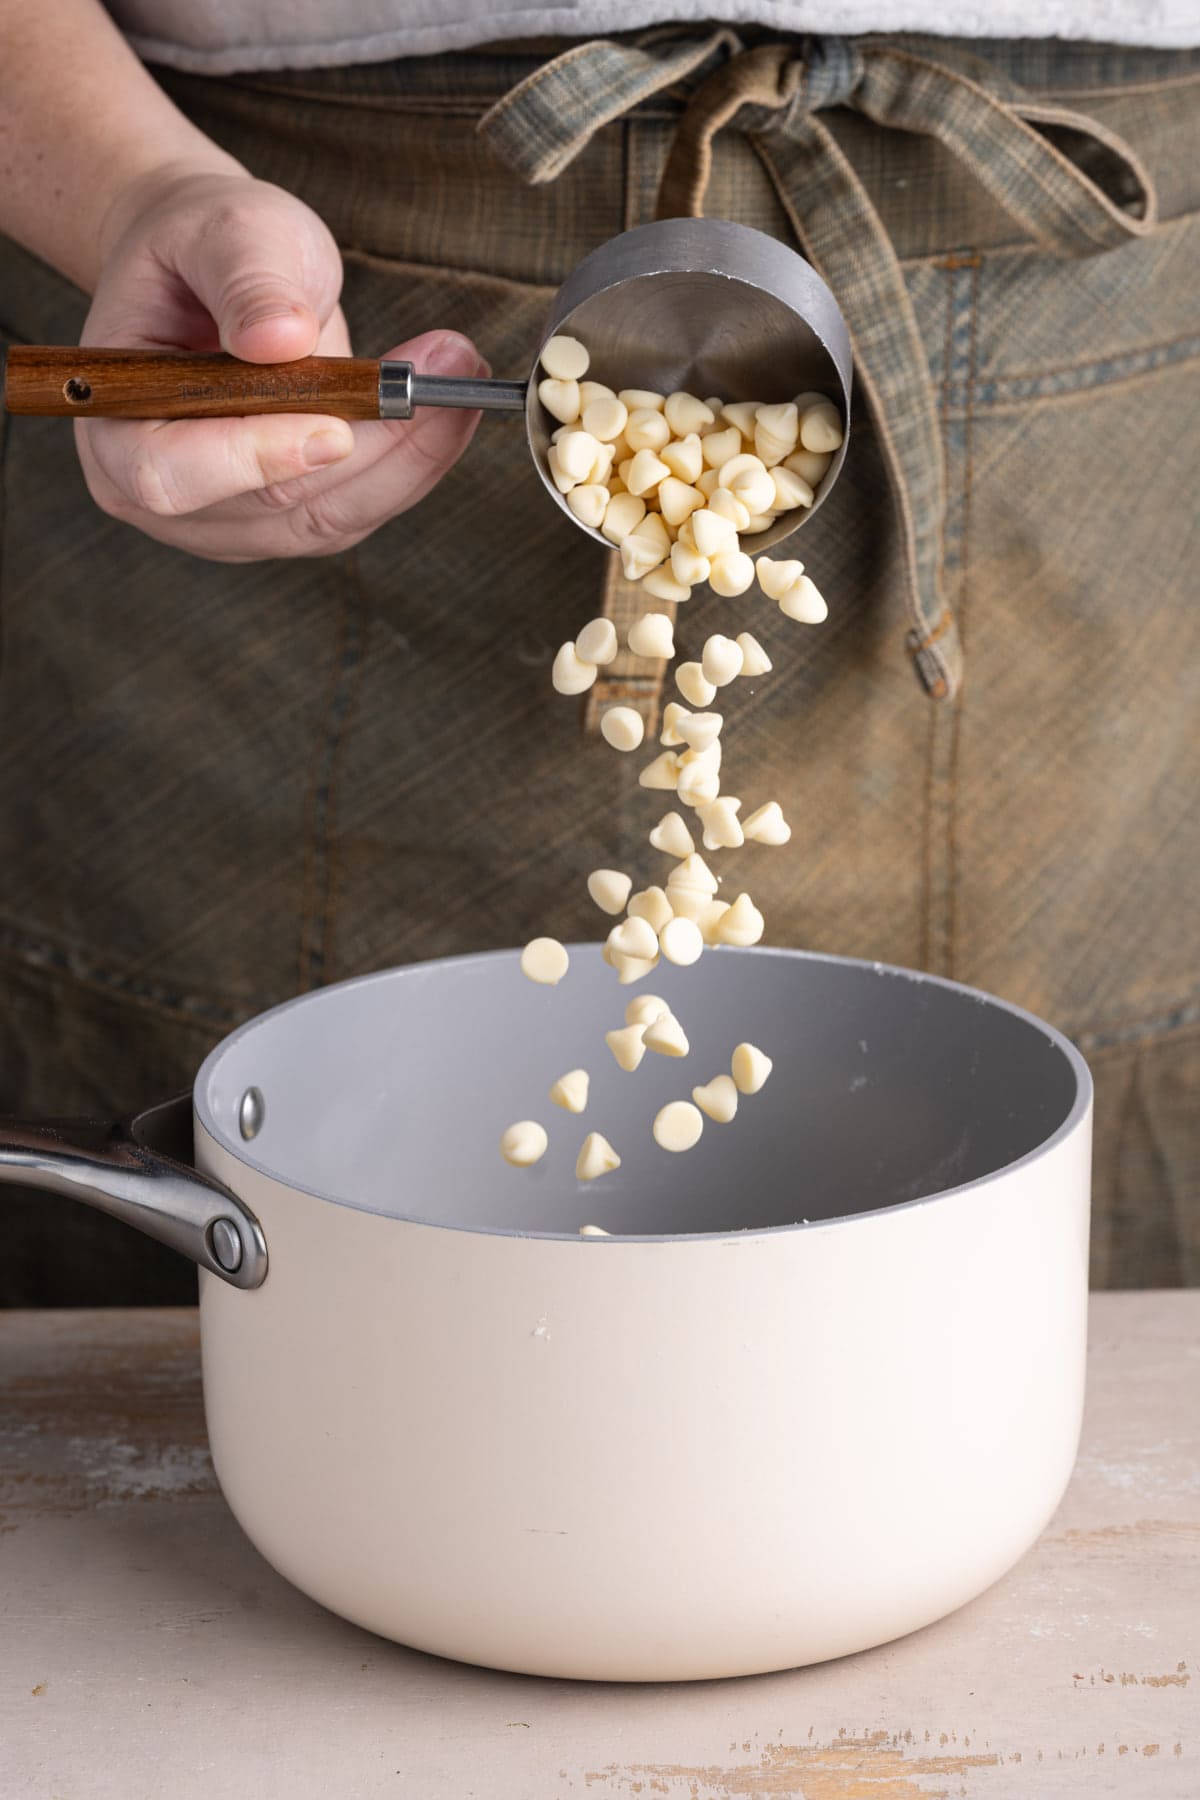 Adding white chocolate chips to a pot with butter to melt together